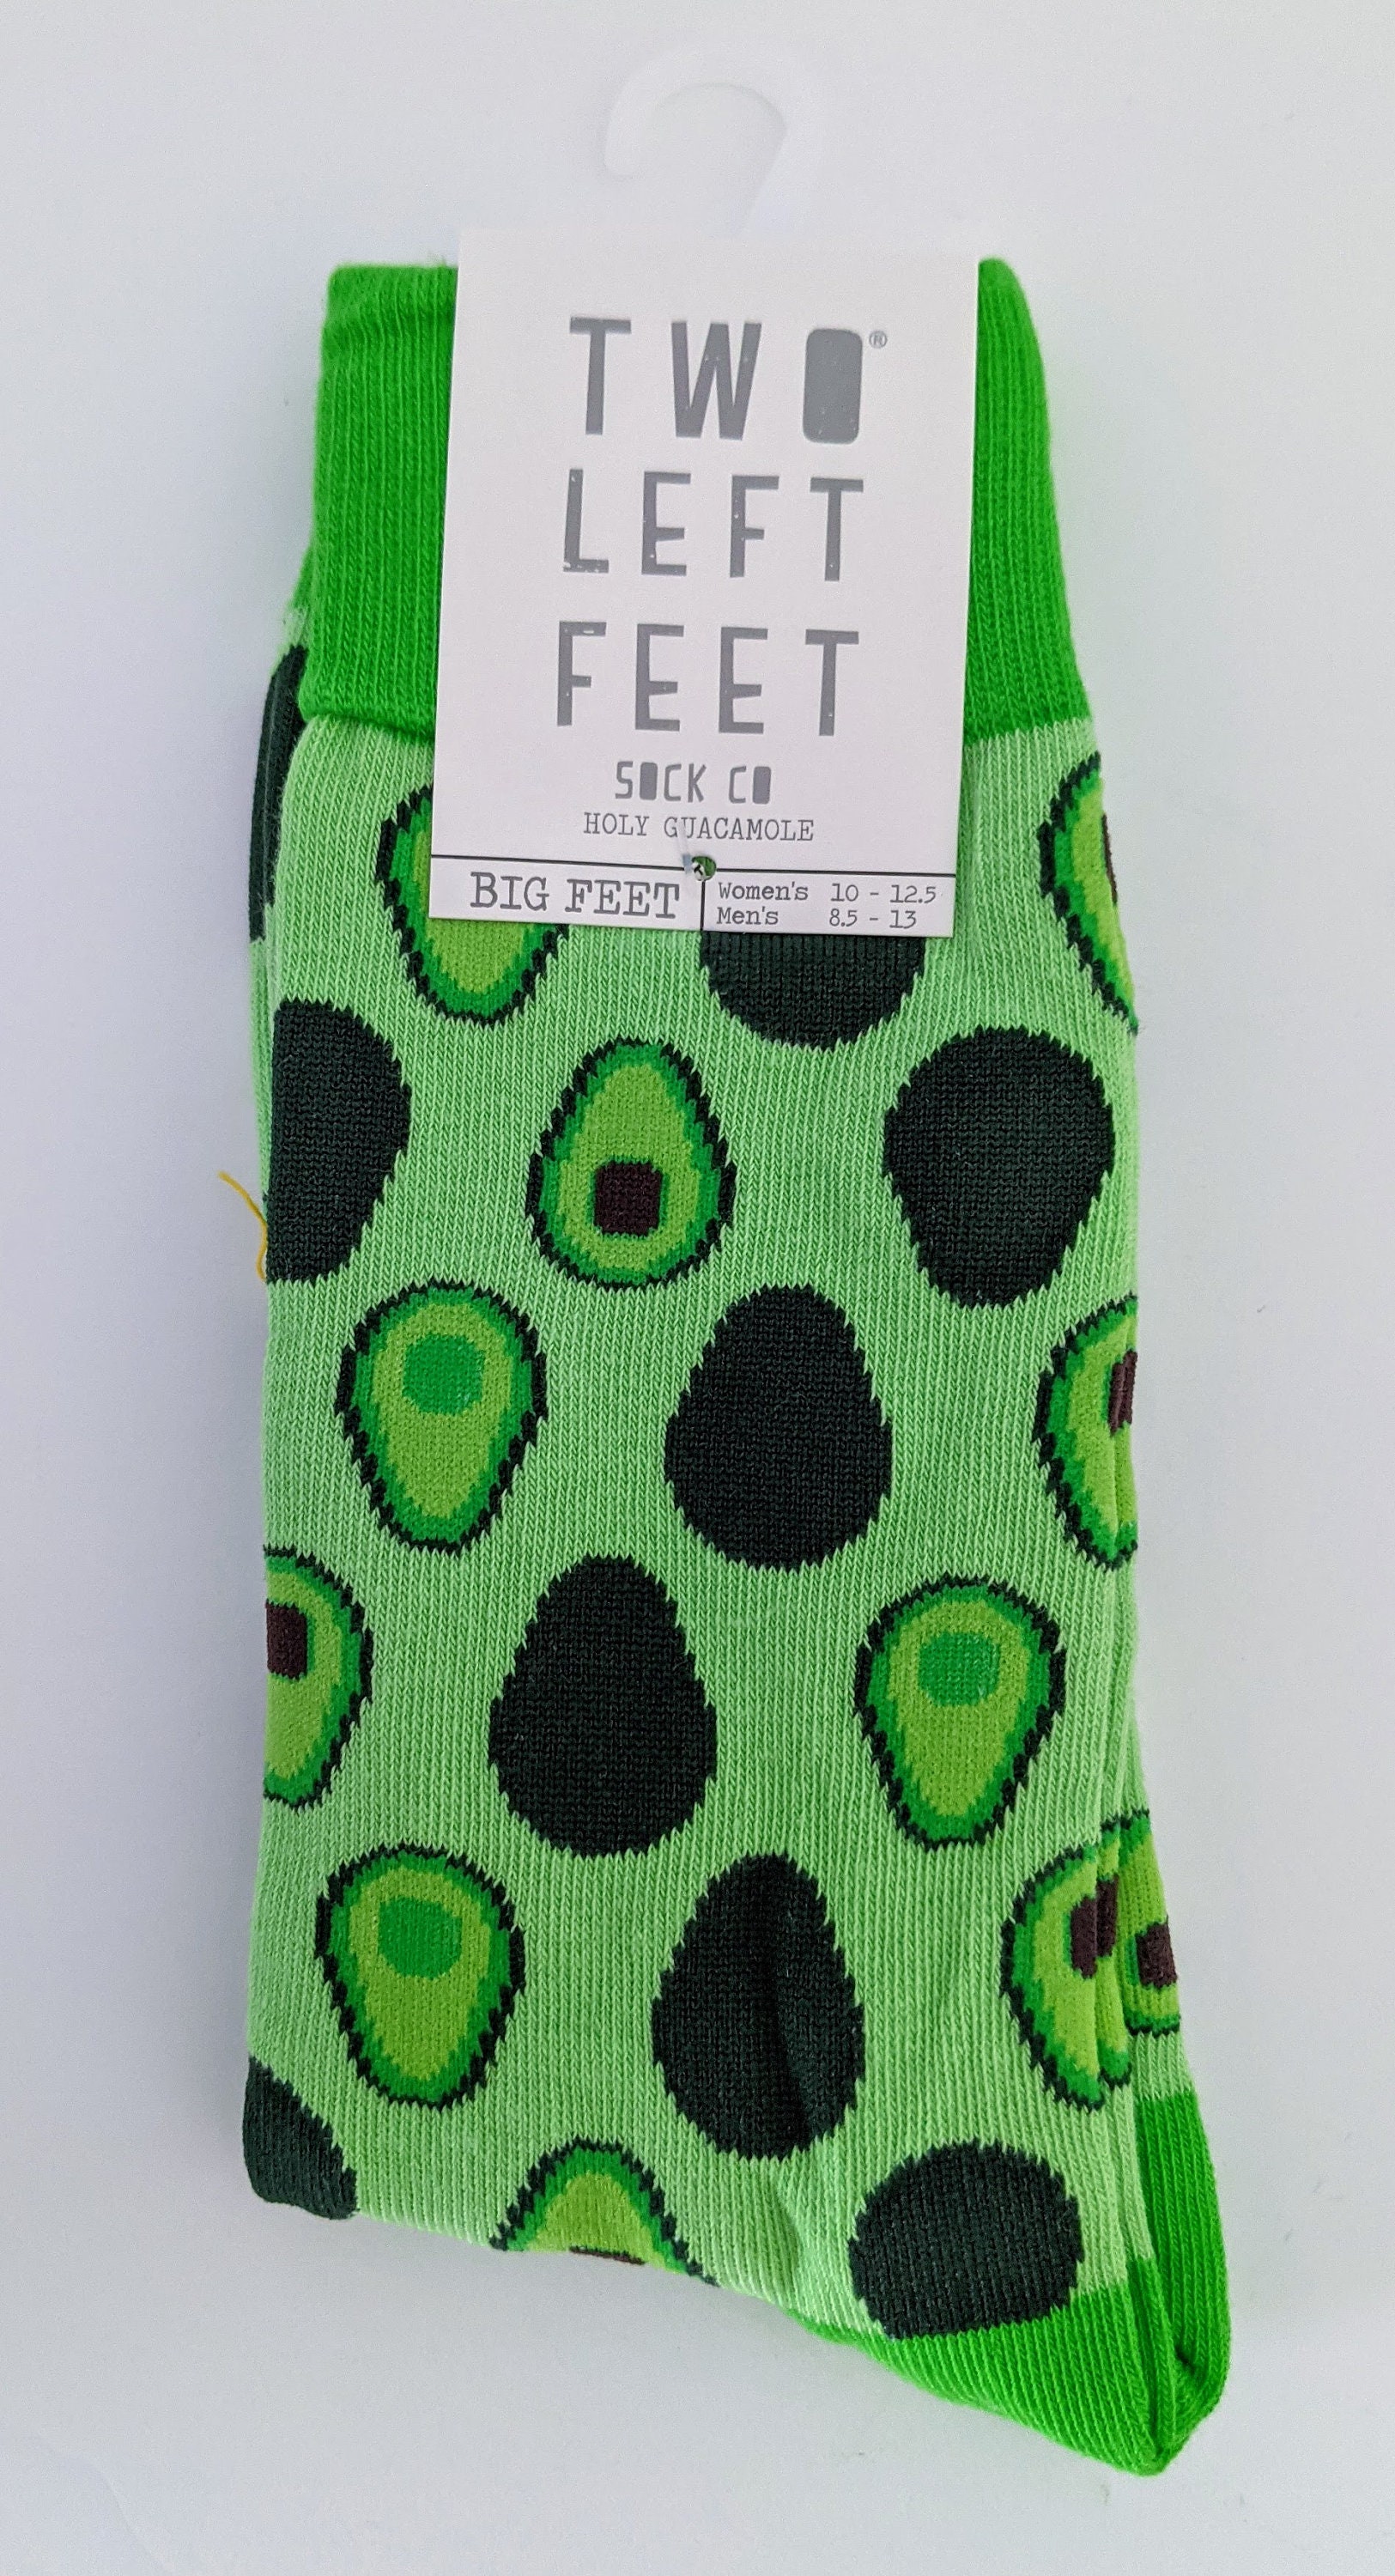 Food Unisex Socks for Adults / Small FeetWomen's 5.5-9.5 | Etsy